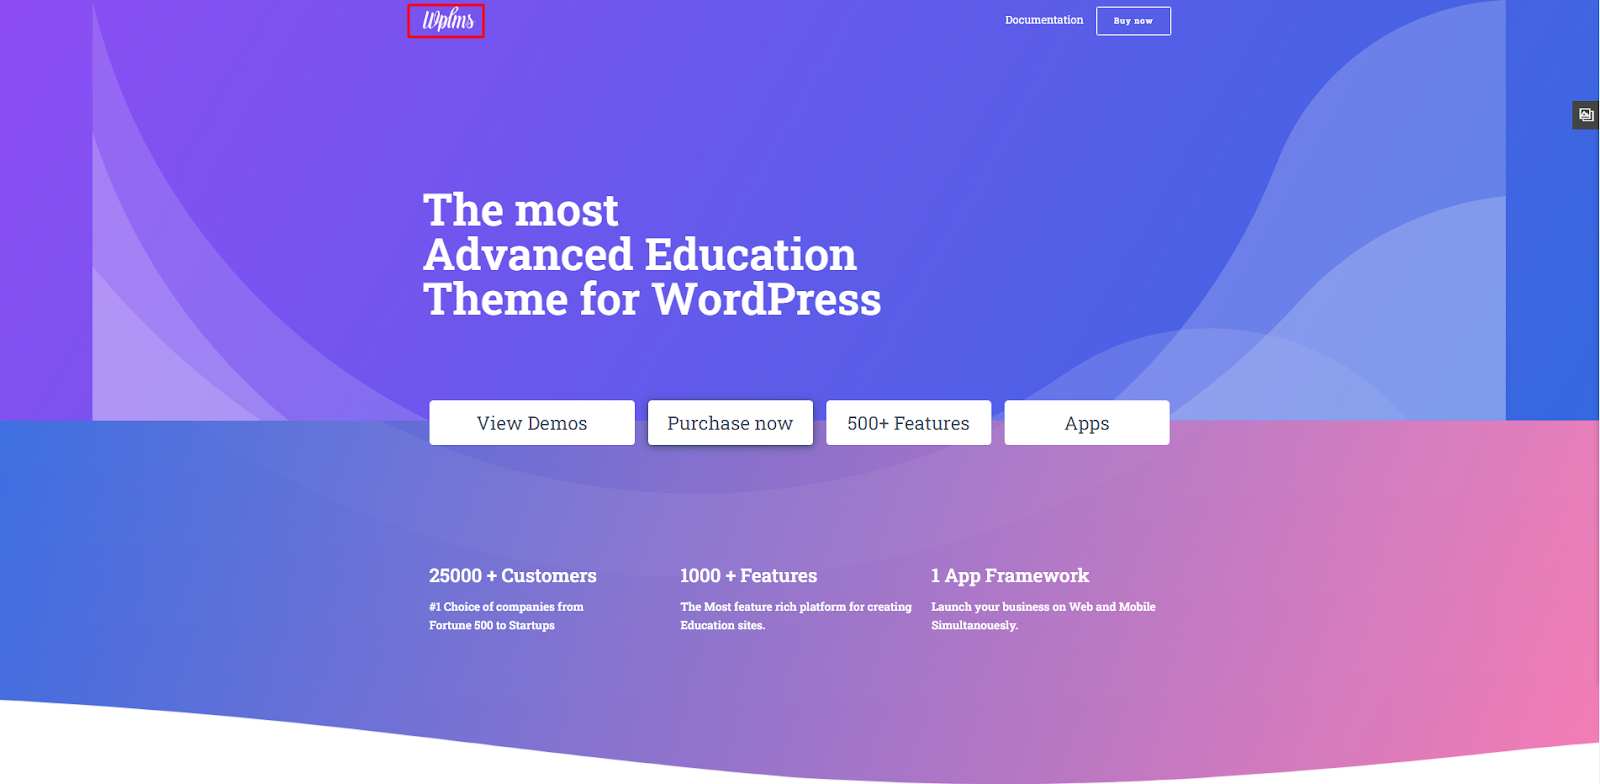 WPLMS - WordPress Learning Management System Educational Theme